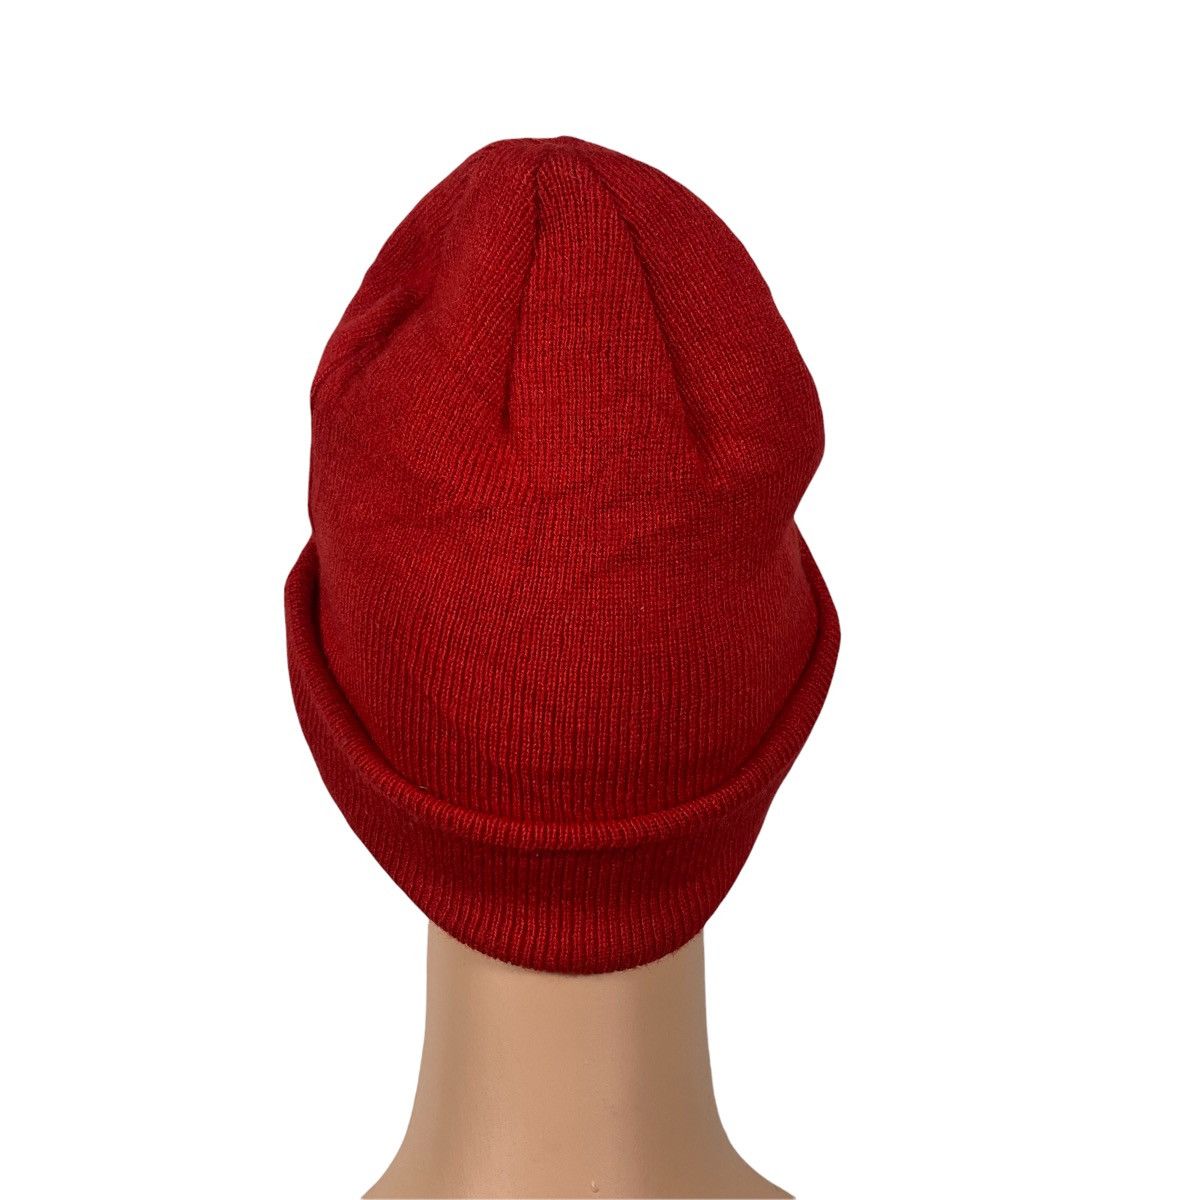 Vintage 90s Nike Embroidery Beanie Unisex Red Colour - 3